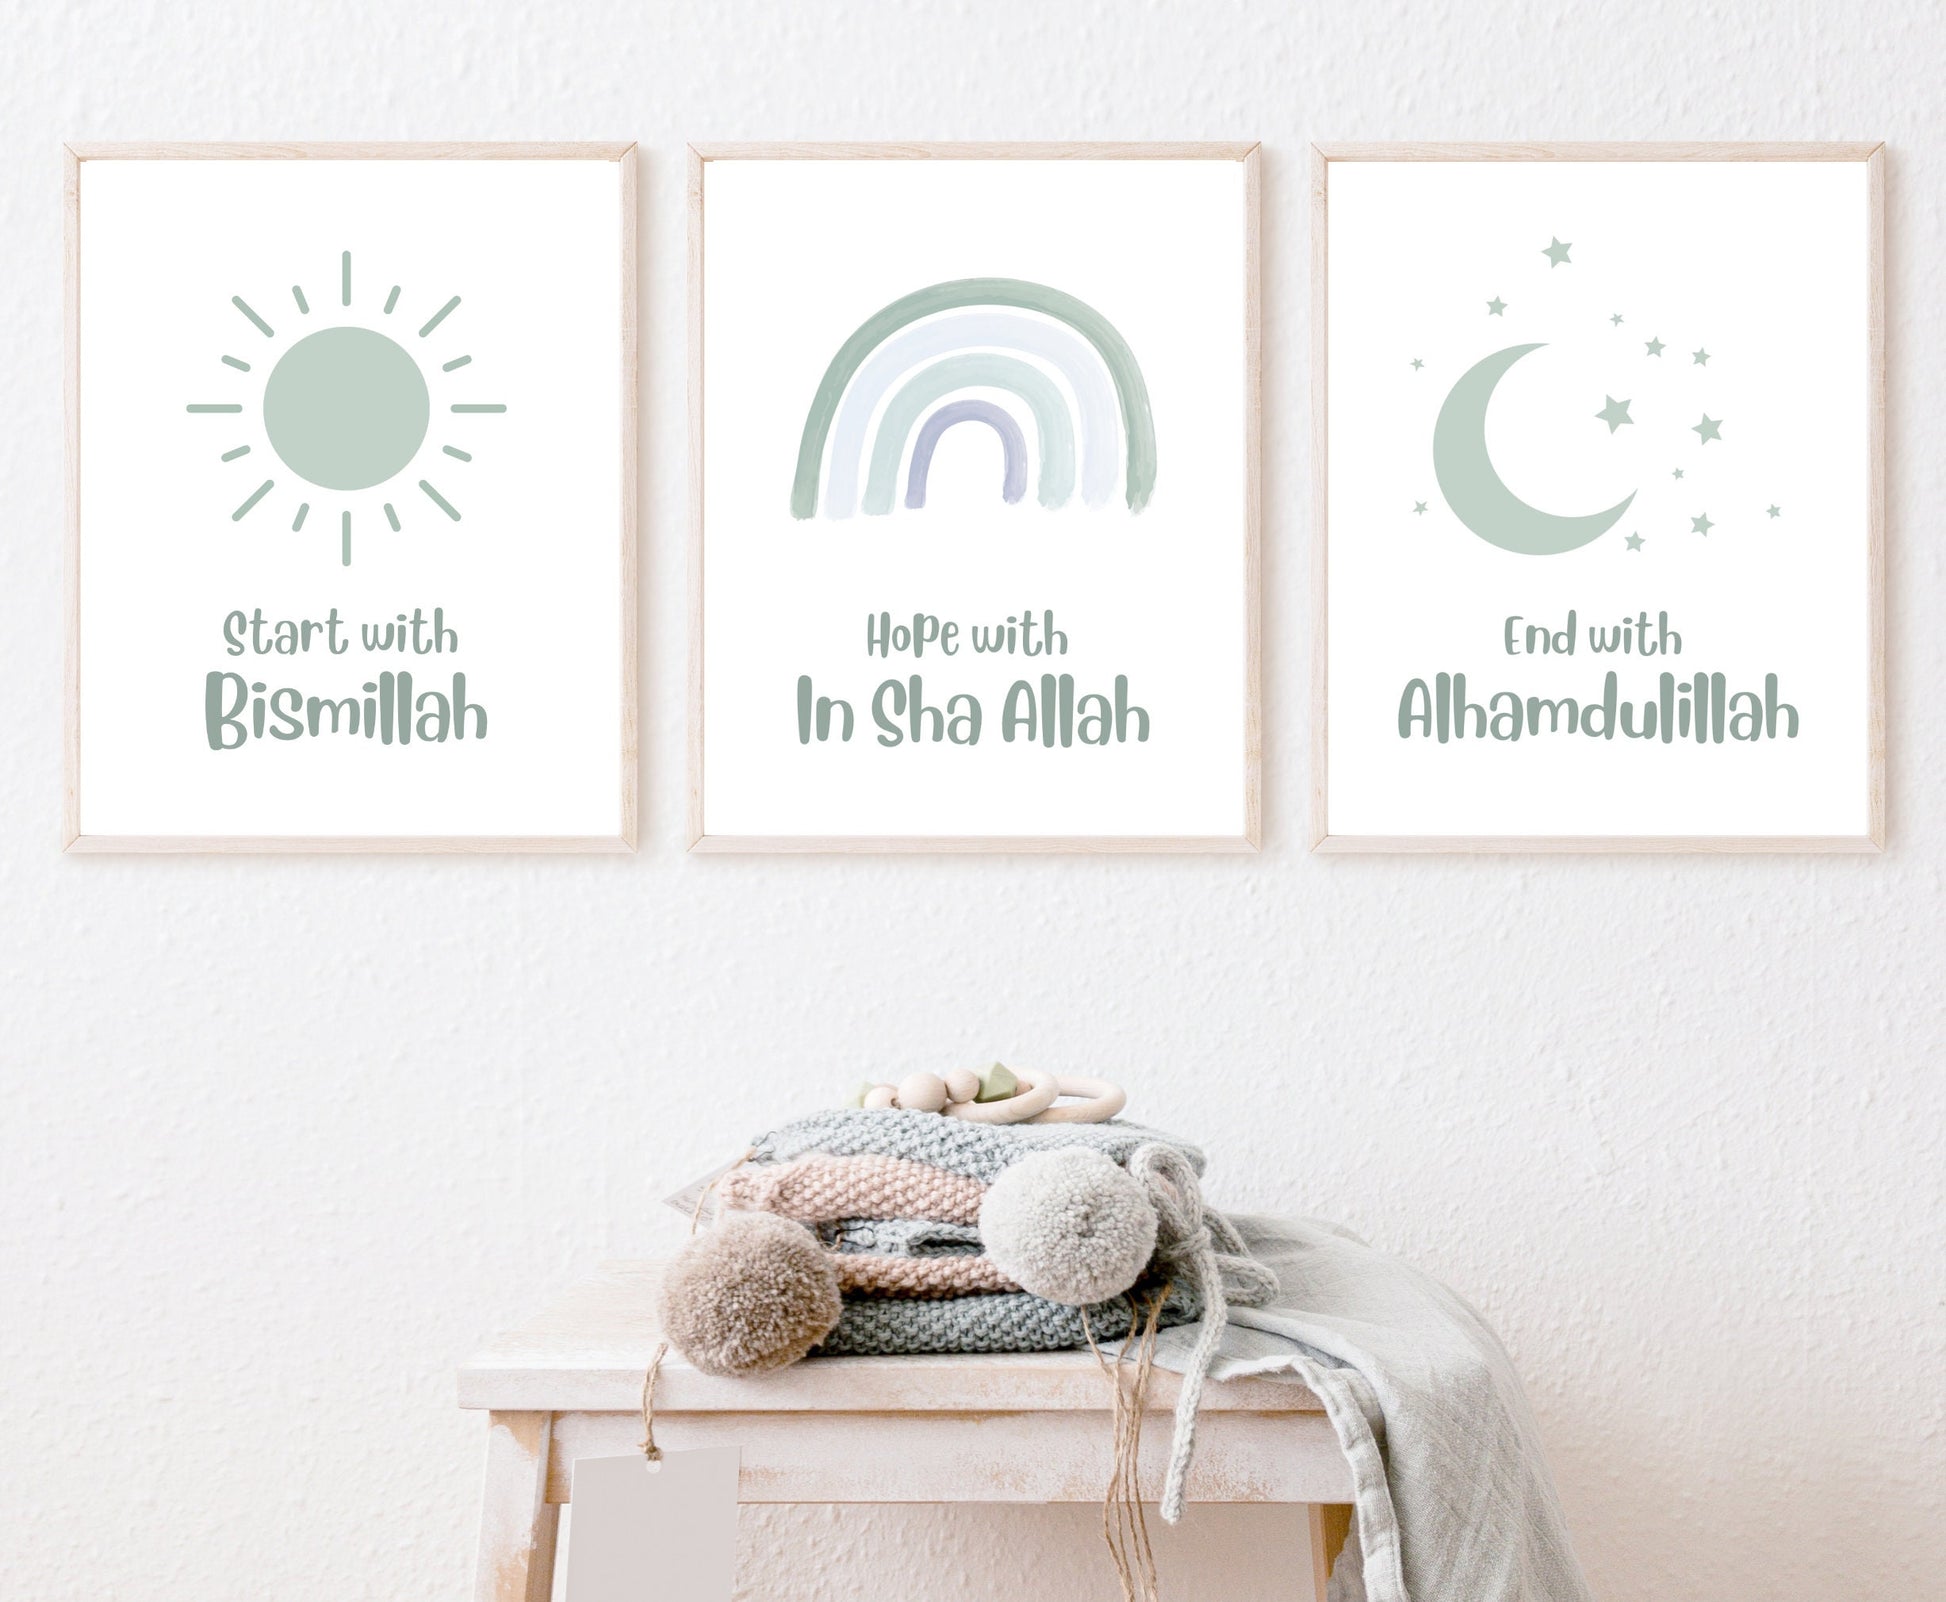 An image showing three digital print graphics that are hanging on a wall. The first one shows a baby green sun with “Start with Bismillah” written in the same color, right below. The middle graphic is a baby green rainbow with “Hope with In Sha Allah” written just below it. The last frame shows a graphic of a baby green crescent and some tiny stars in the same color with “End with Alhamdulillah” written just below the latter.